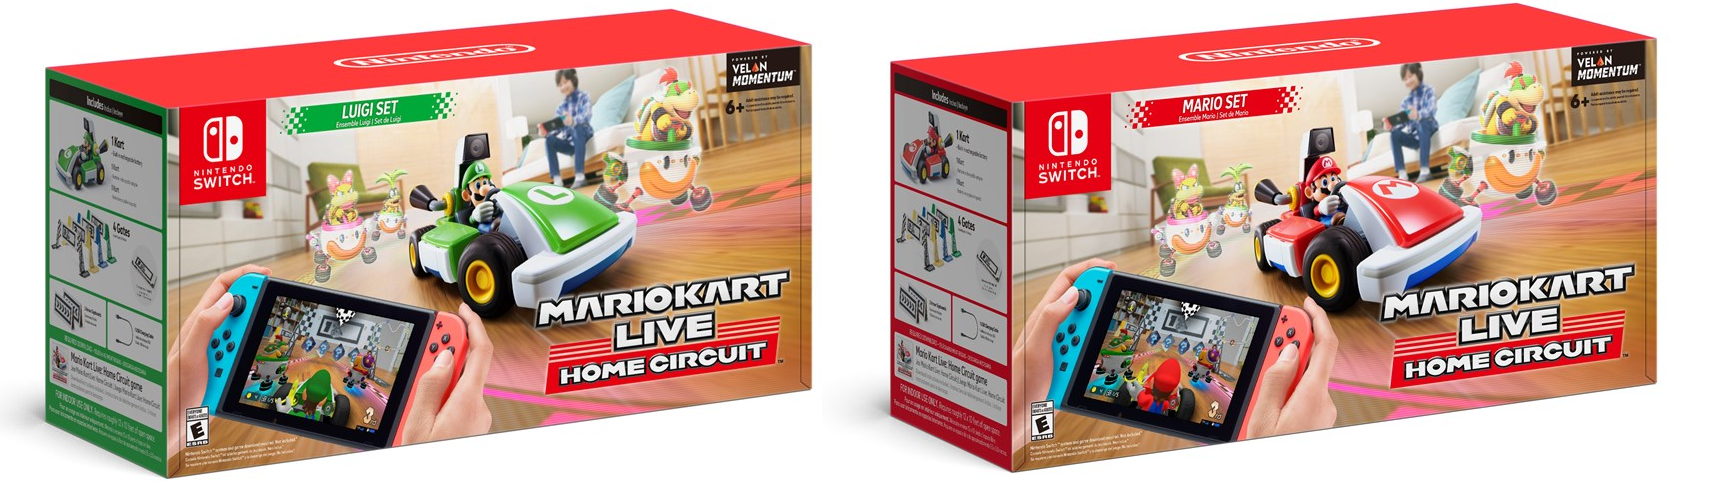 Mario Kart Live Home Circuit To Come In Mario And Luigi Versions The Gonintendo Archives 7529